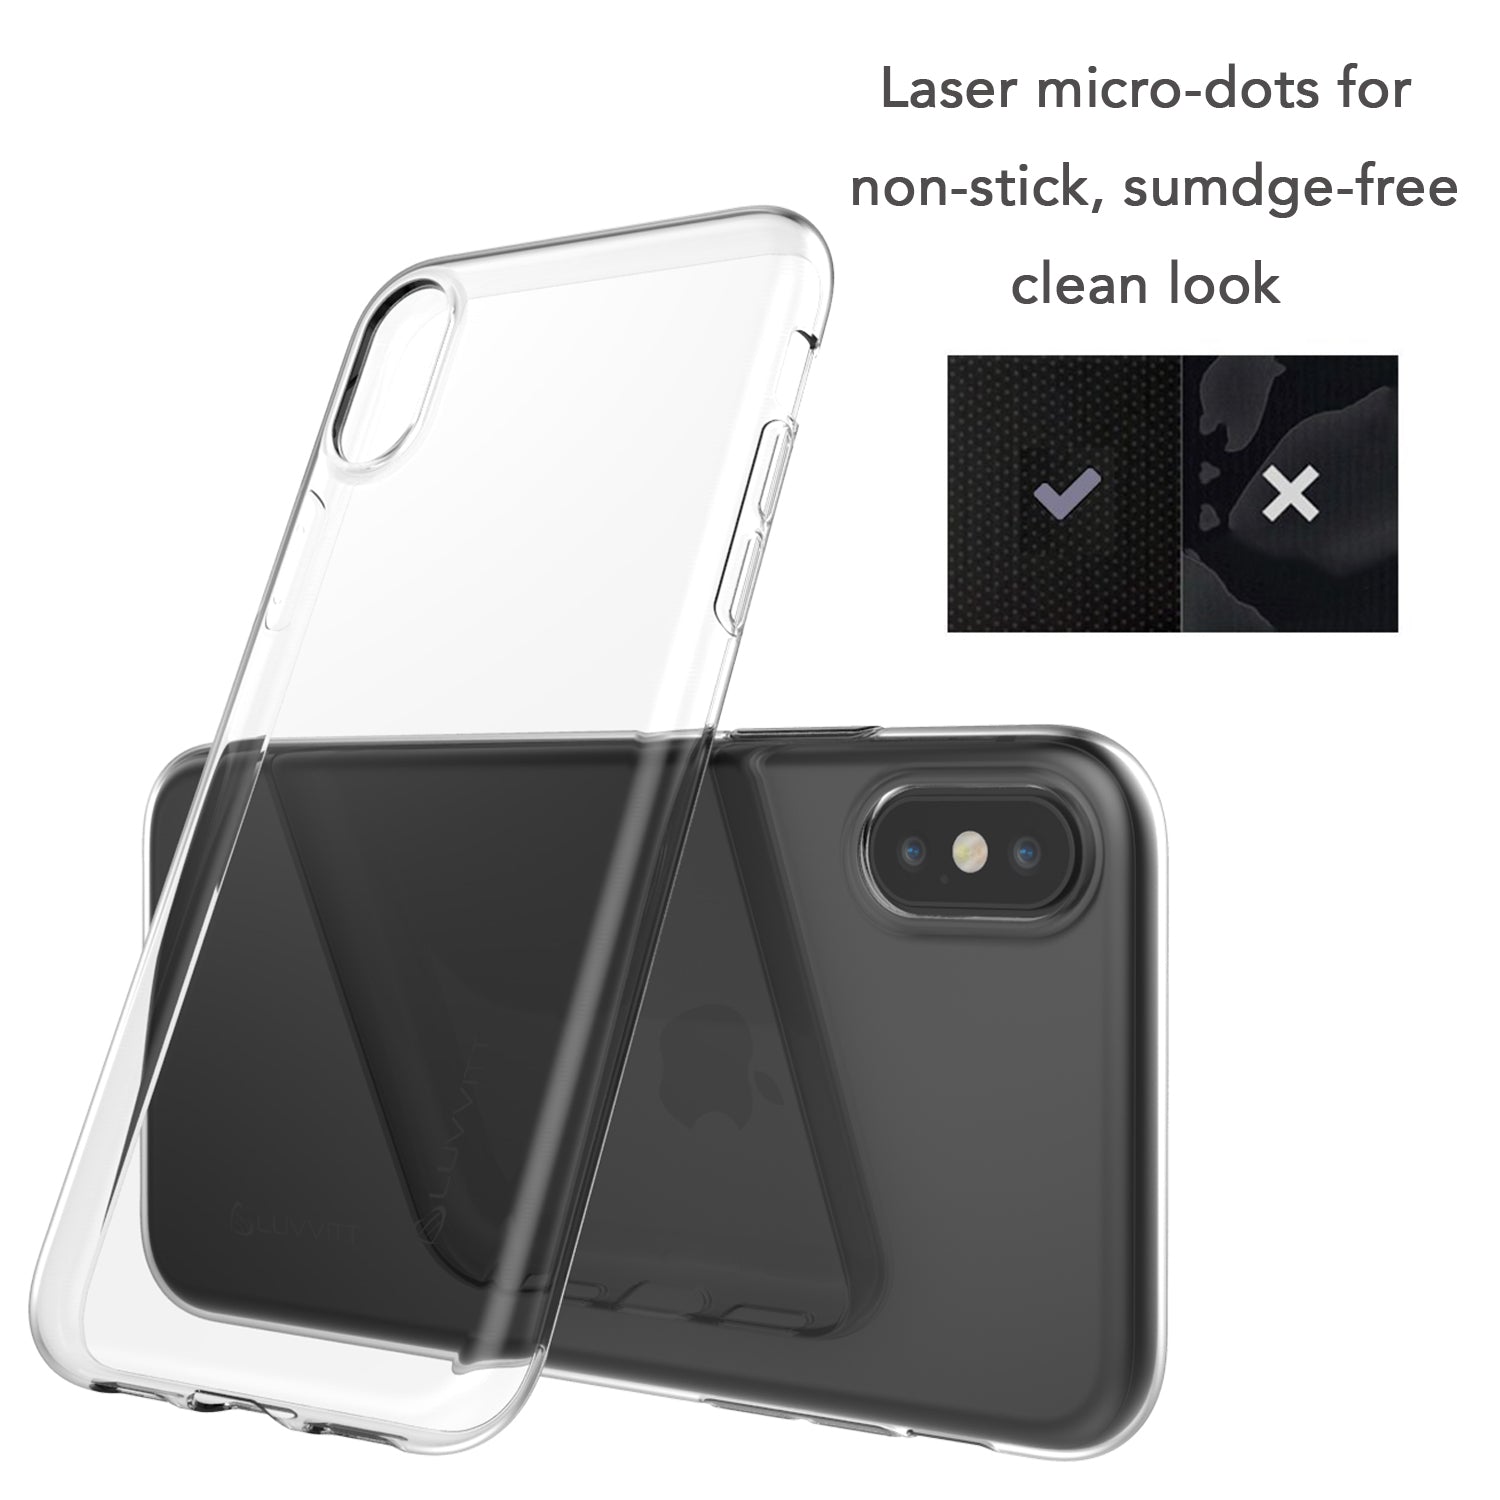 Luvvitt Clarity Case and Tempered Glass Screen Protector for iPhone XS Max 6.5 inch Clear